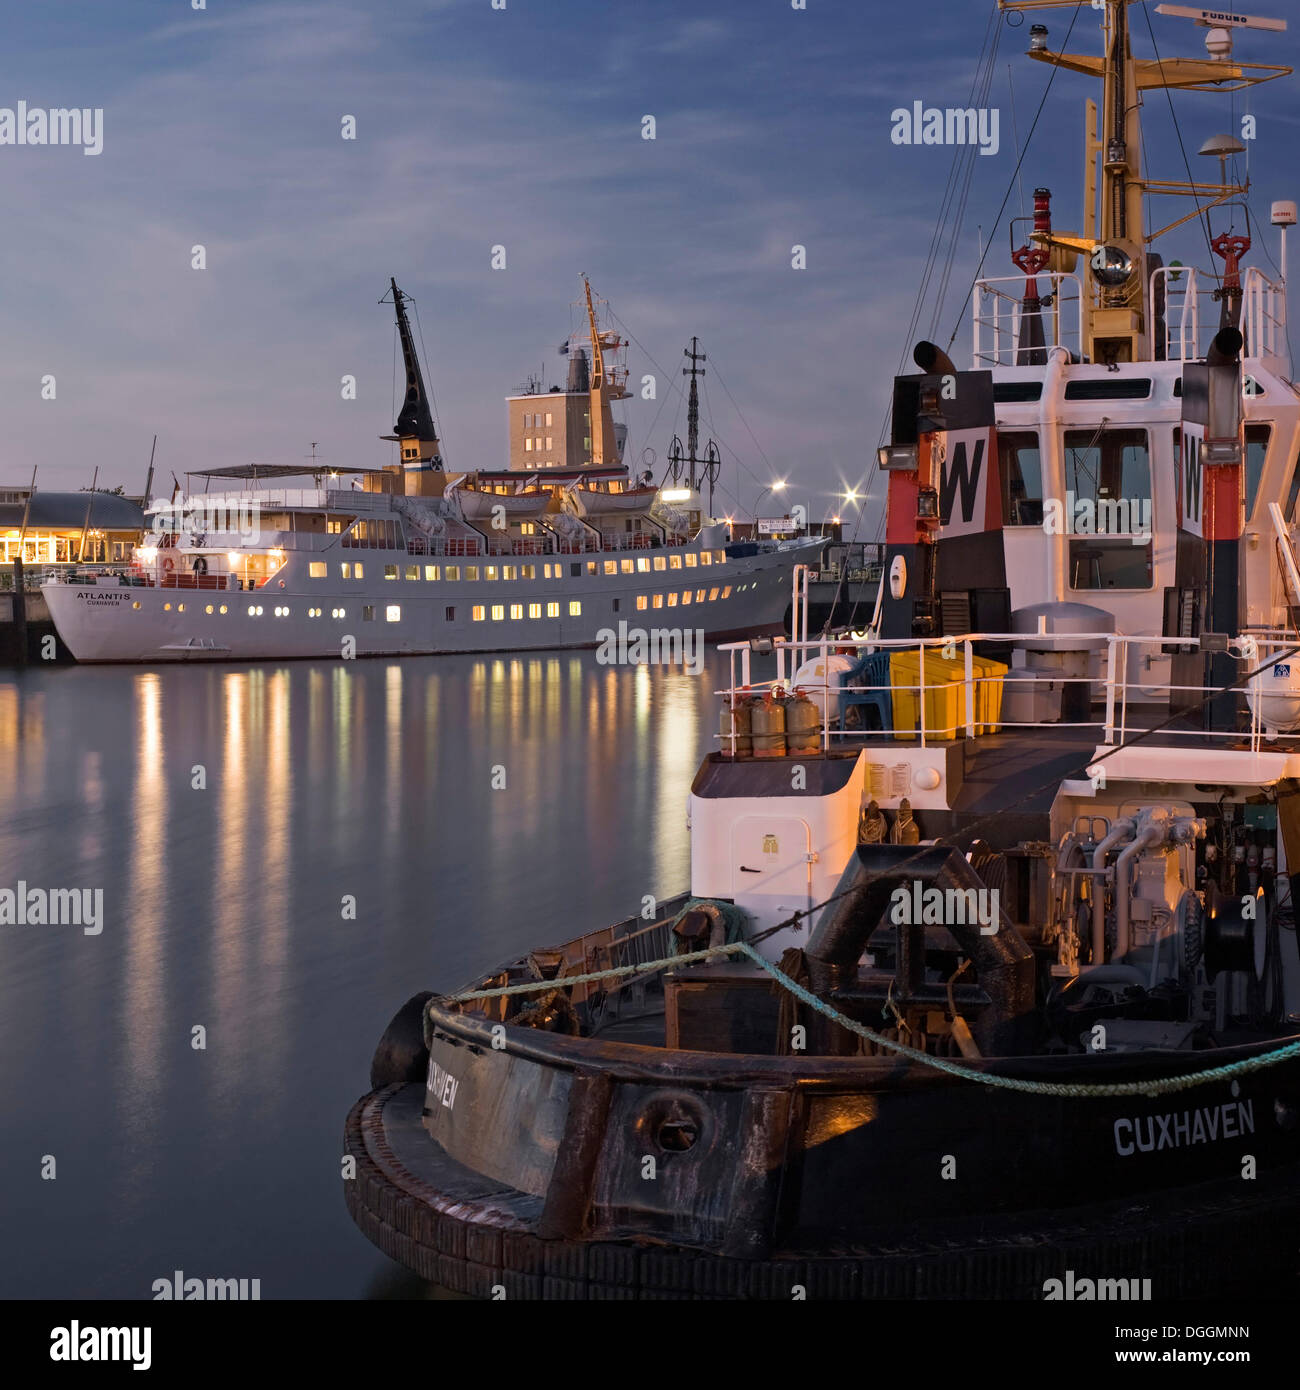 Cruise liner, Atlantis, and tugboat, Taucher O. Wulf 3, at Alte Liebe pier in Cuxhaven, Lower Saxony Stock Photo